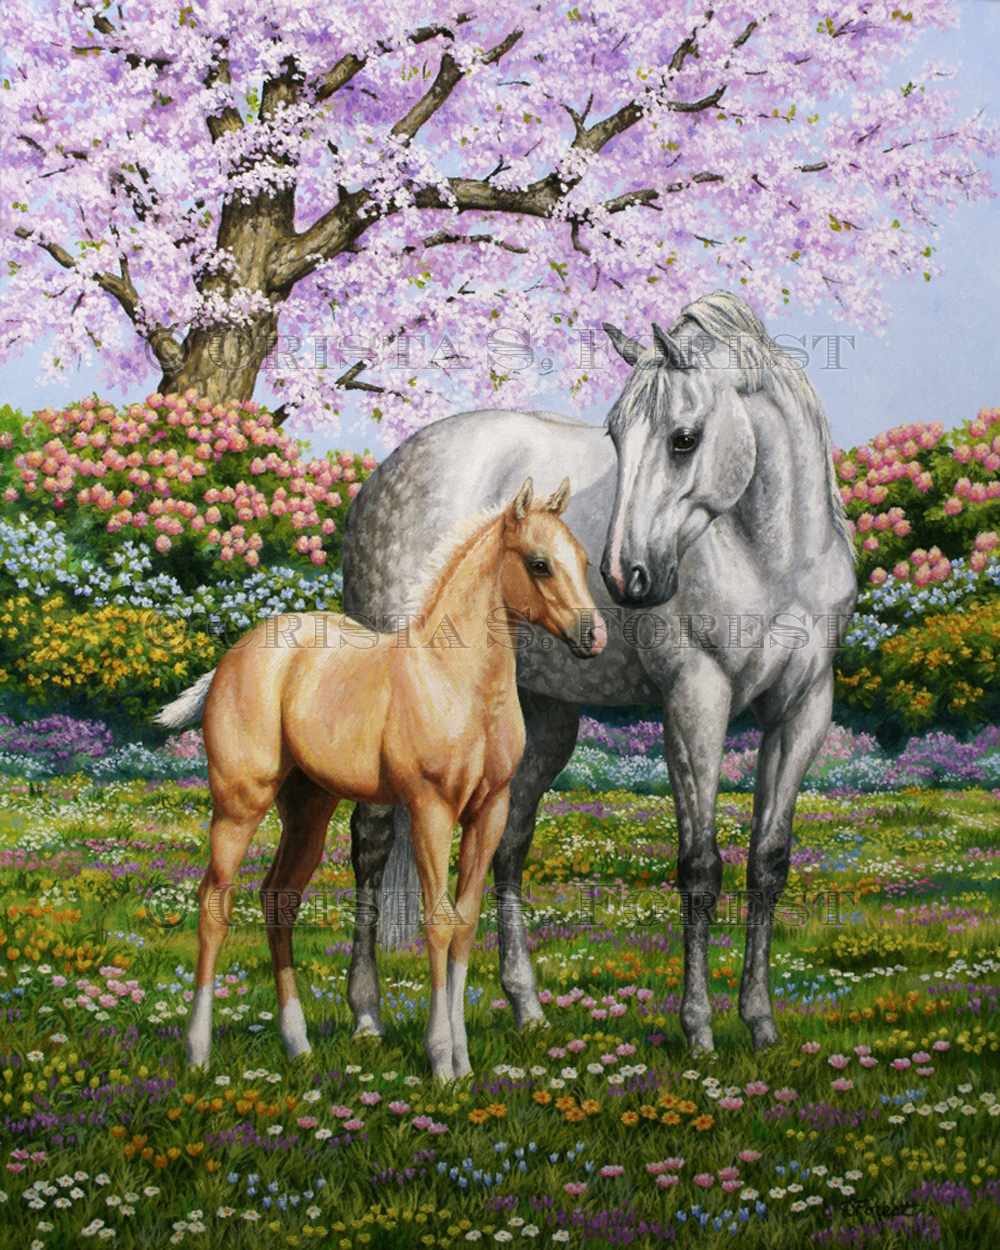 Oil painting of a mare and foal by equine artist Crista Forest, ForestStudios.com. Fine Art Prints available